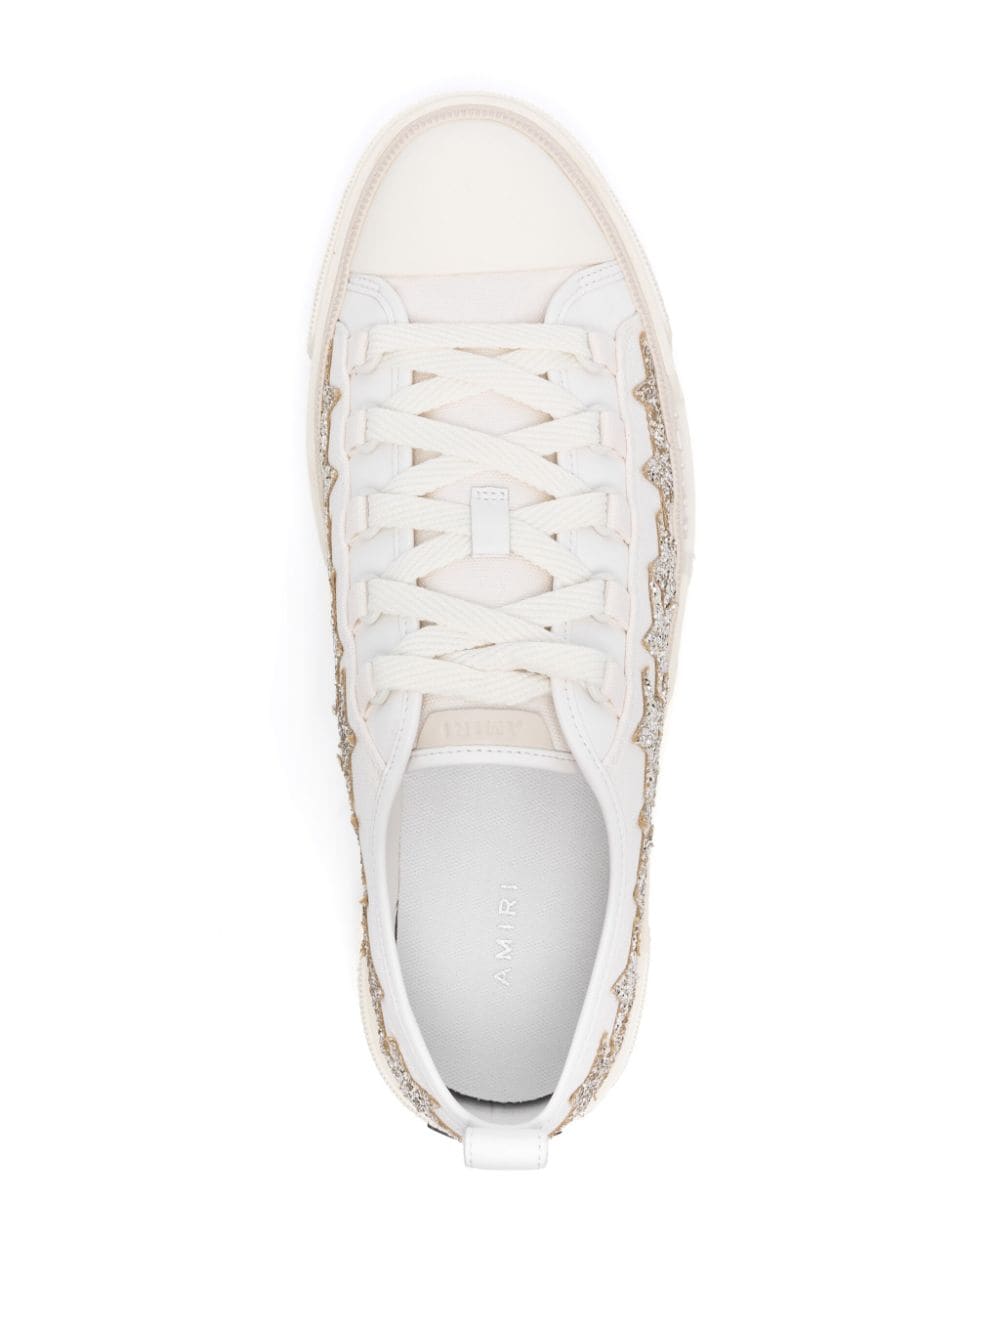 Stars Court low-top sneakers